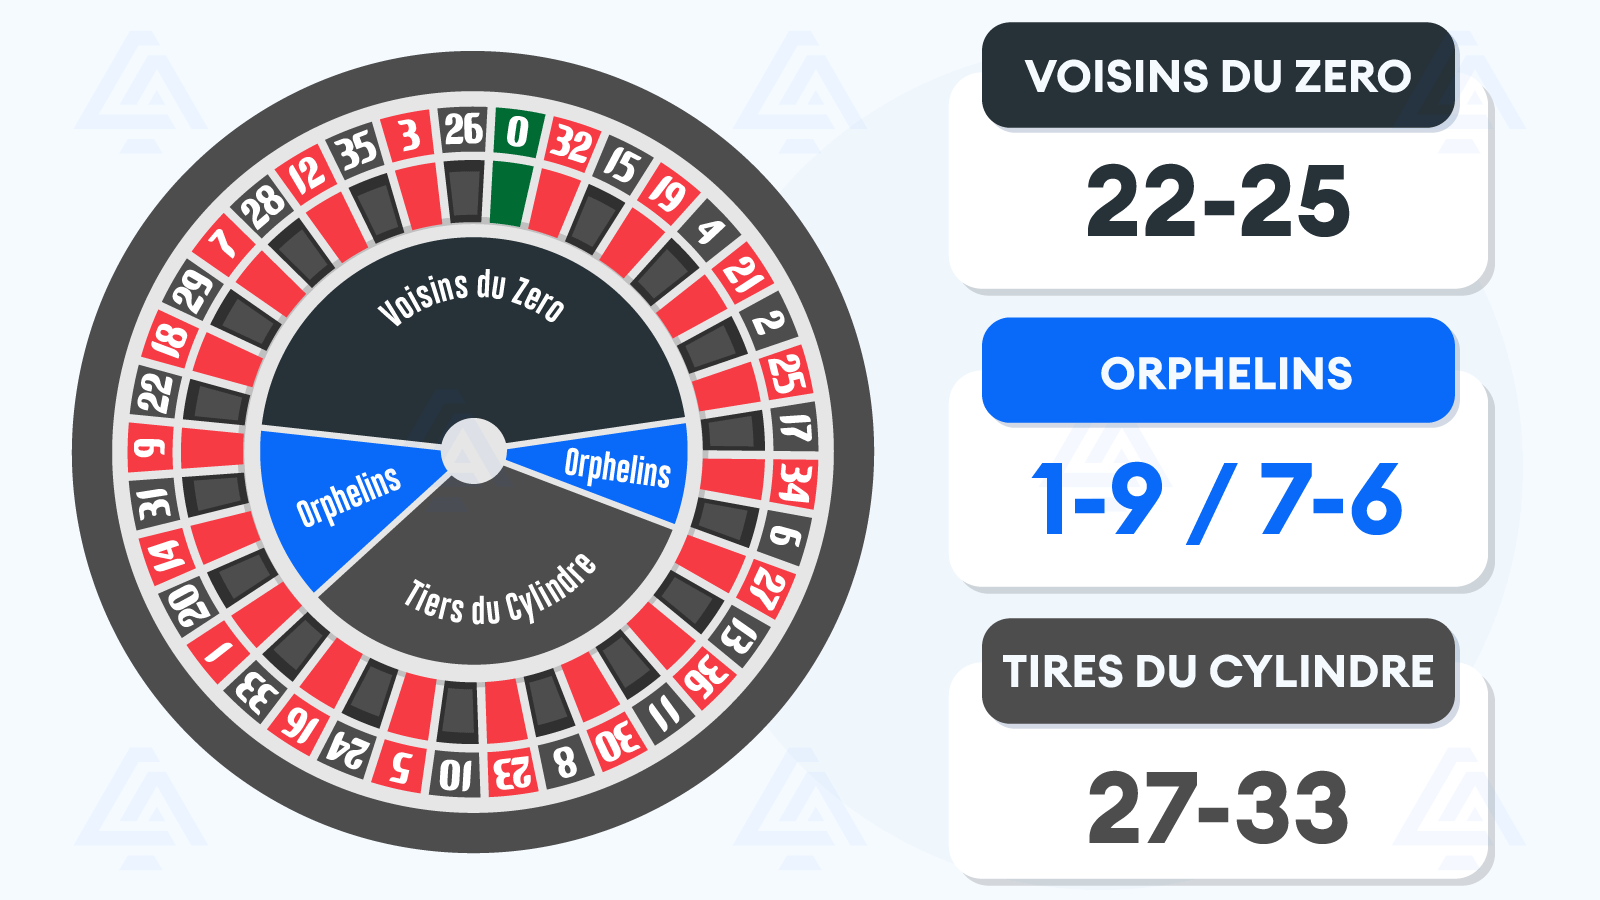 Orphelins, Voisins, and Tiers